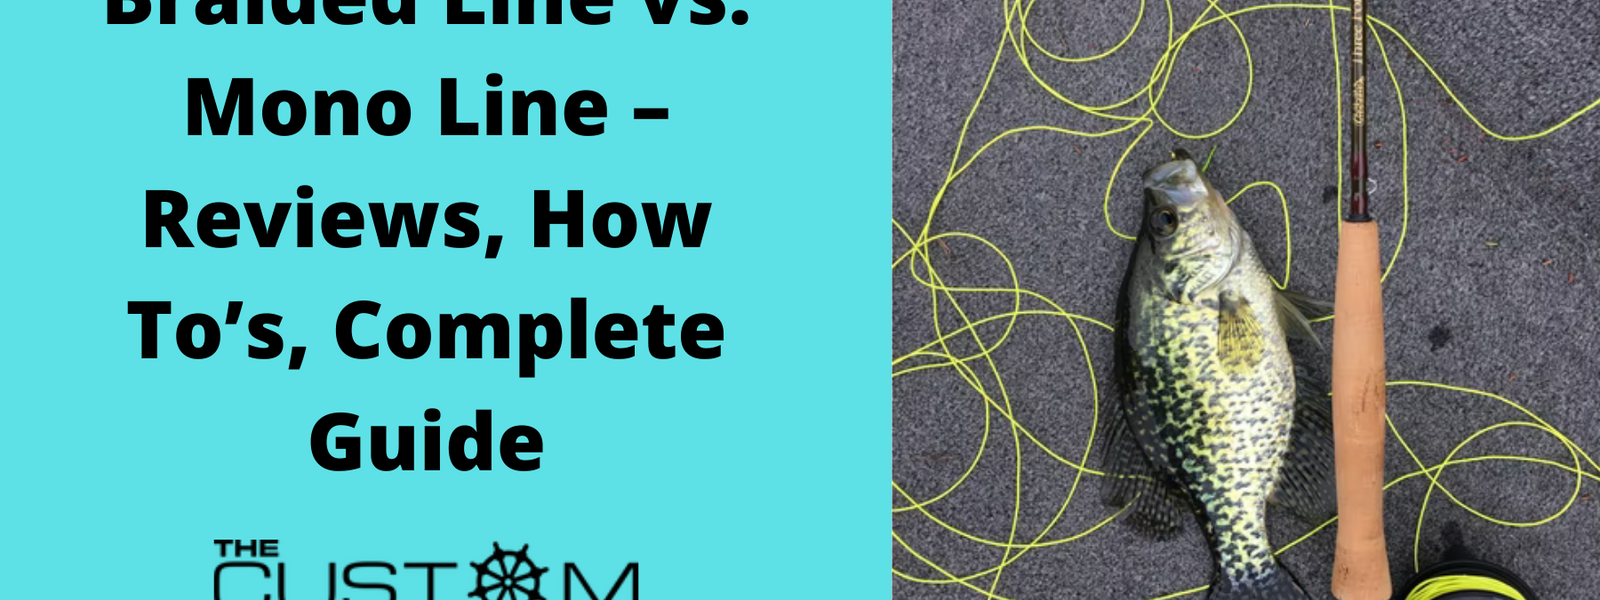 Braided Line vs. Mono Line – Reviews, How To’s, Complete Guide